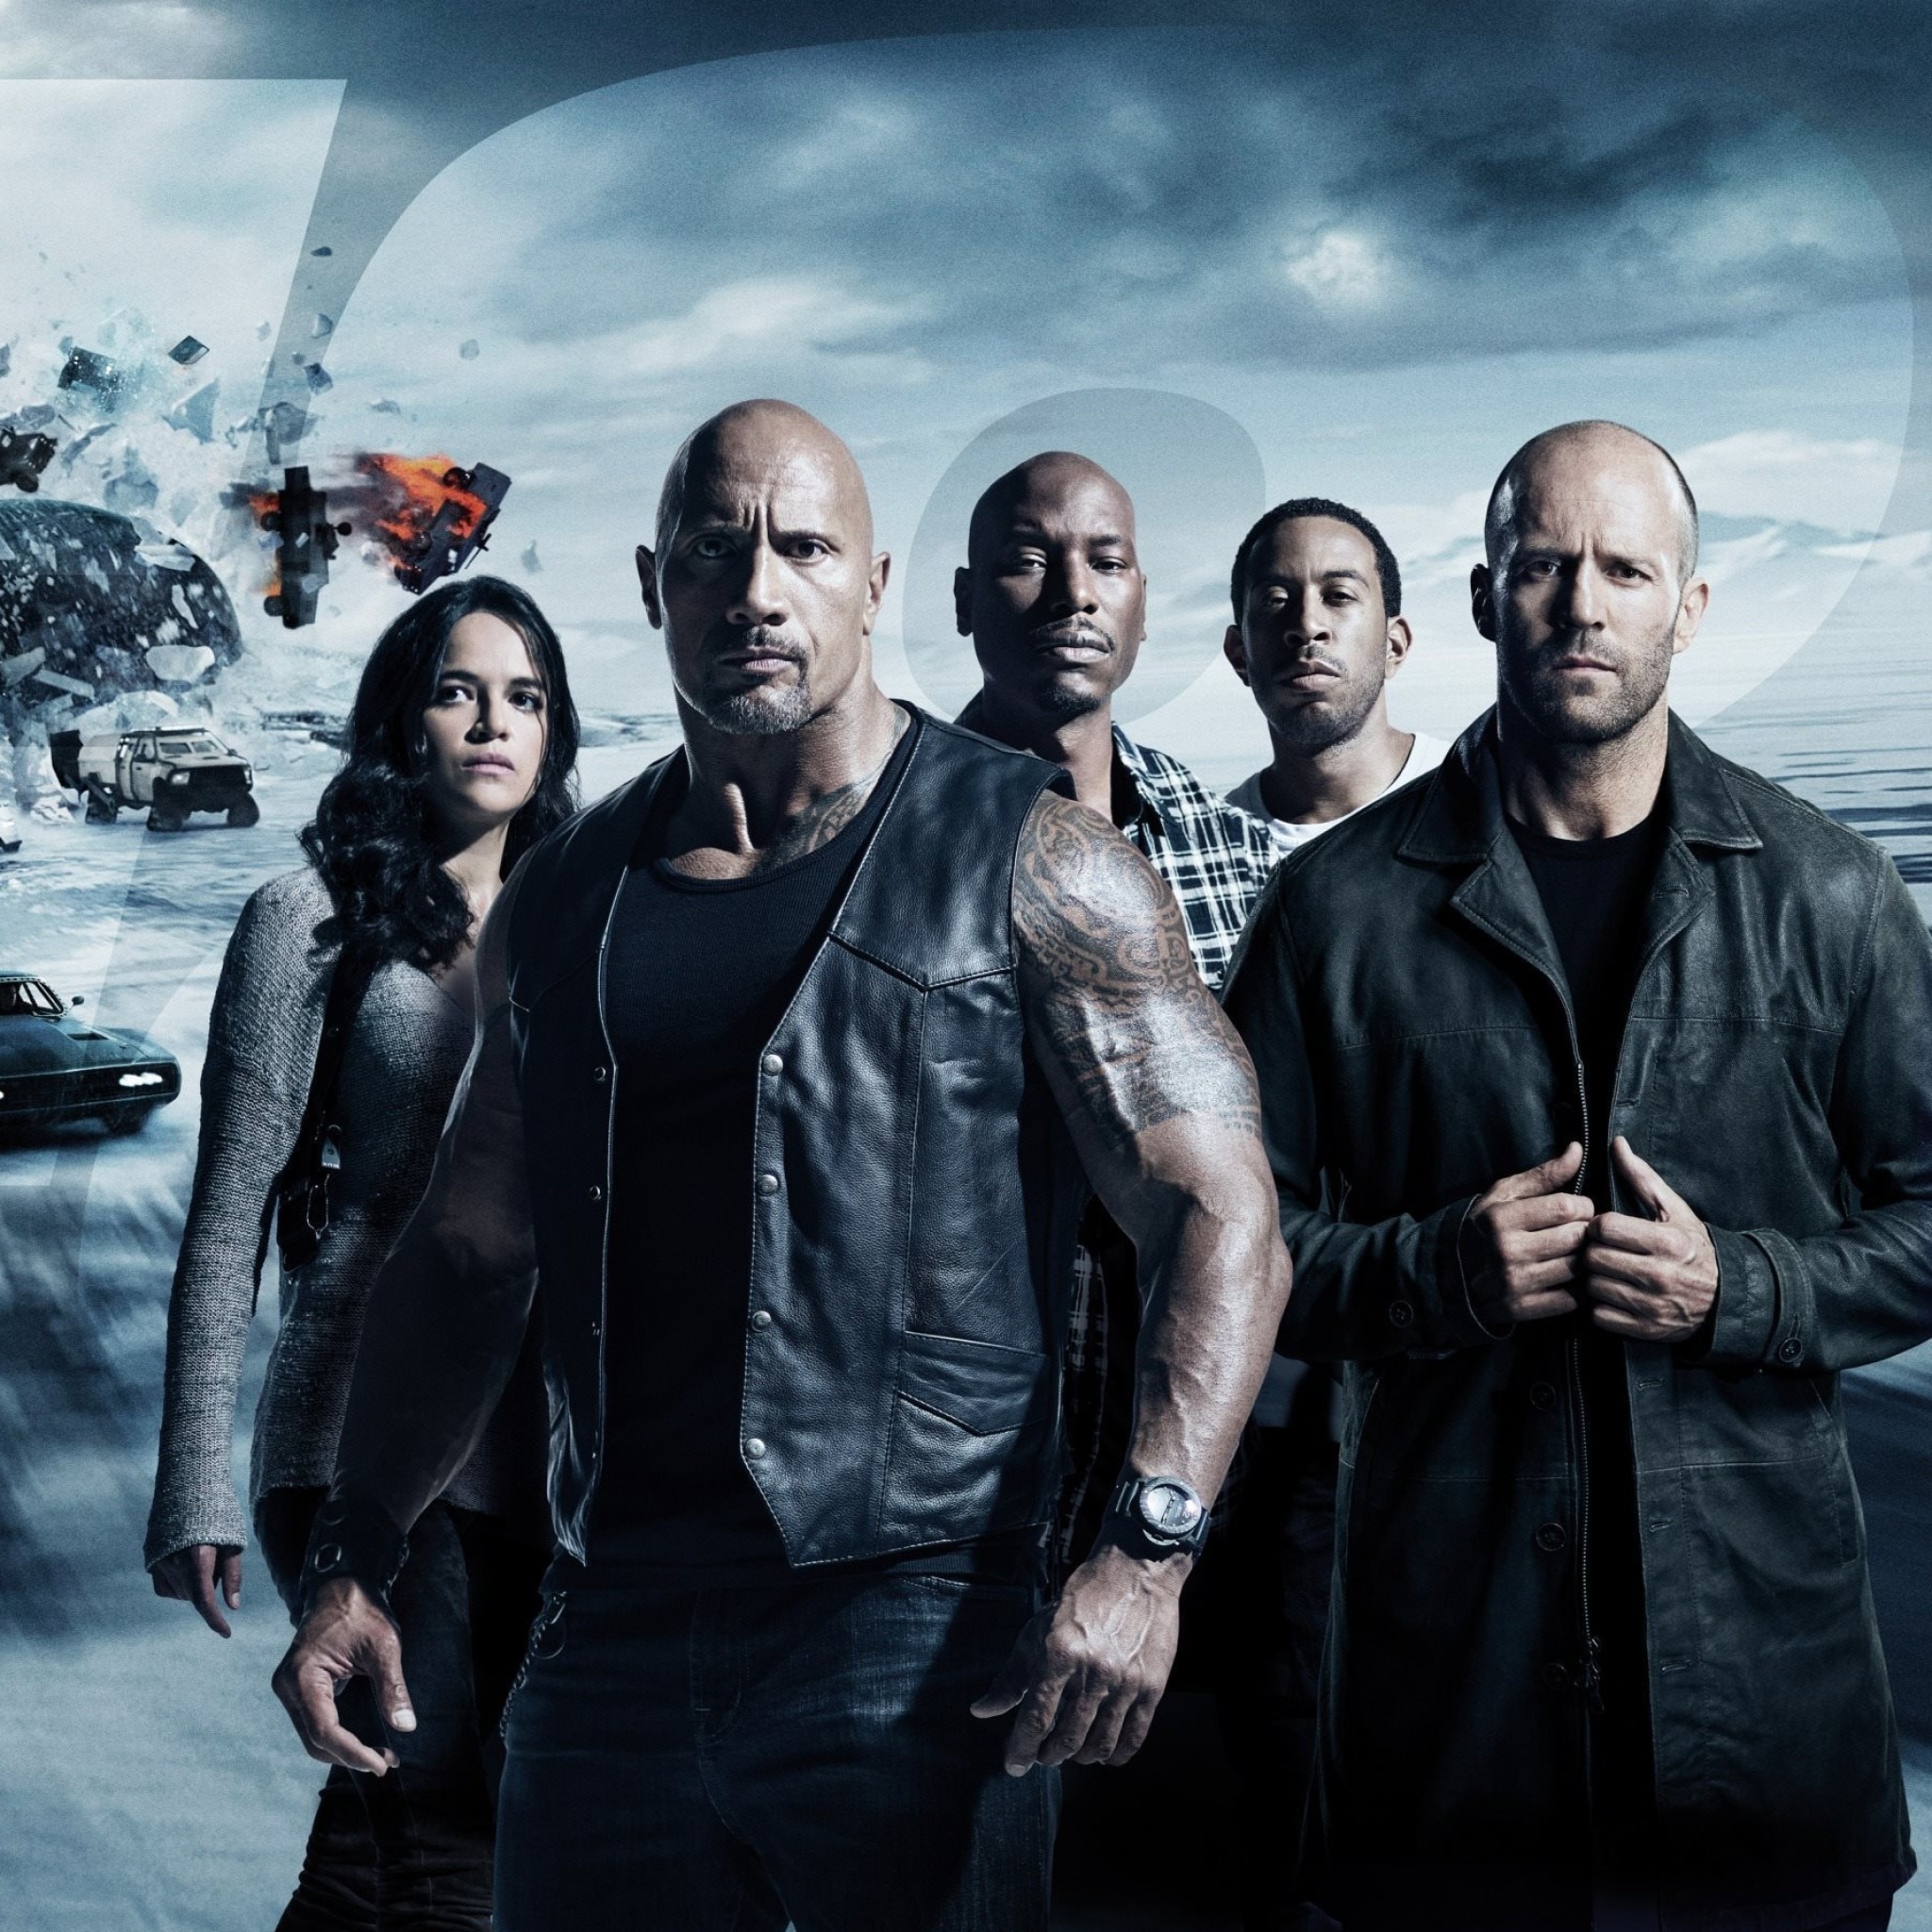 The Fate of the Furious with Vin Diesel, Dwayne Johnson, Charlize Theron wallpaper 2048x2048